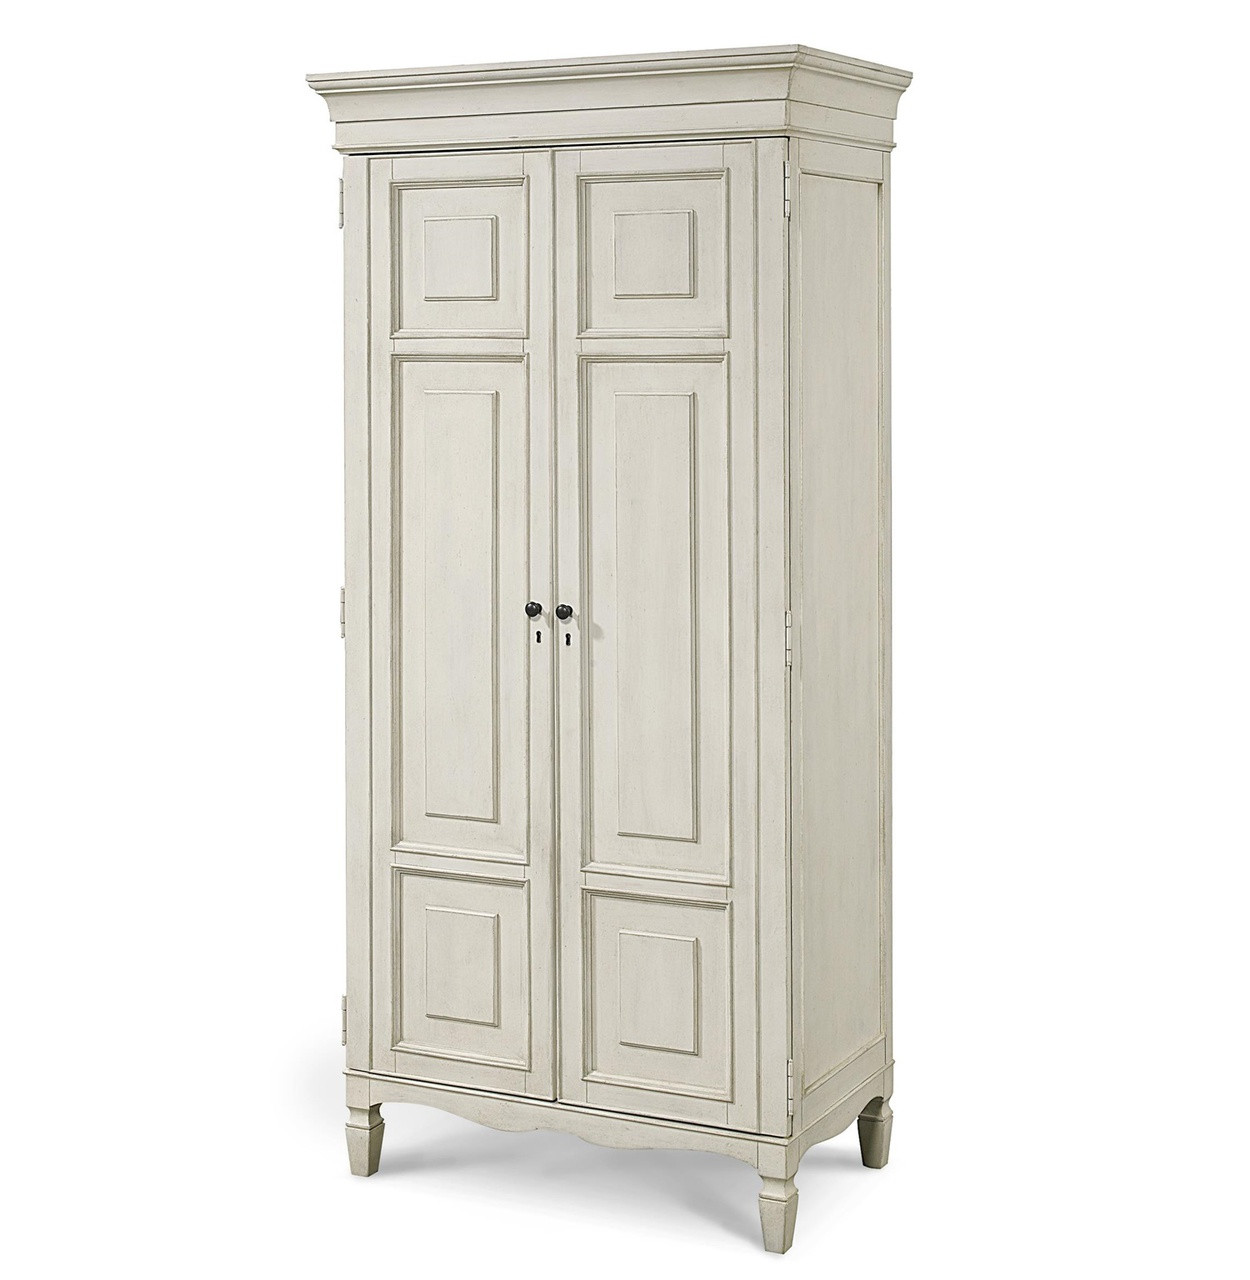 https://cdn11.bigcommerce.com/s-42eba/images/stencil/1280x1280/products/4002/19605/Country_Chic_Maple_Wood_Tall_Armoire_Cabinet2__89713.1452897588.jpg?c=2